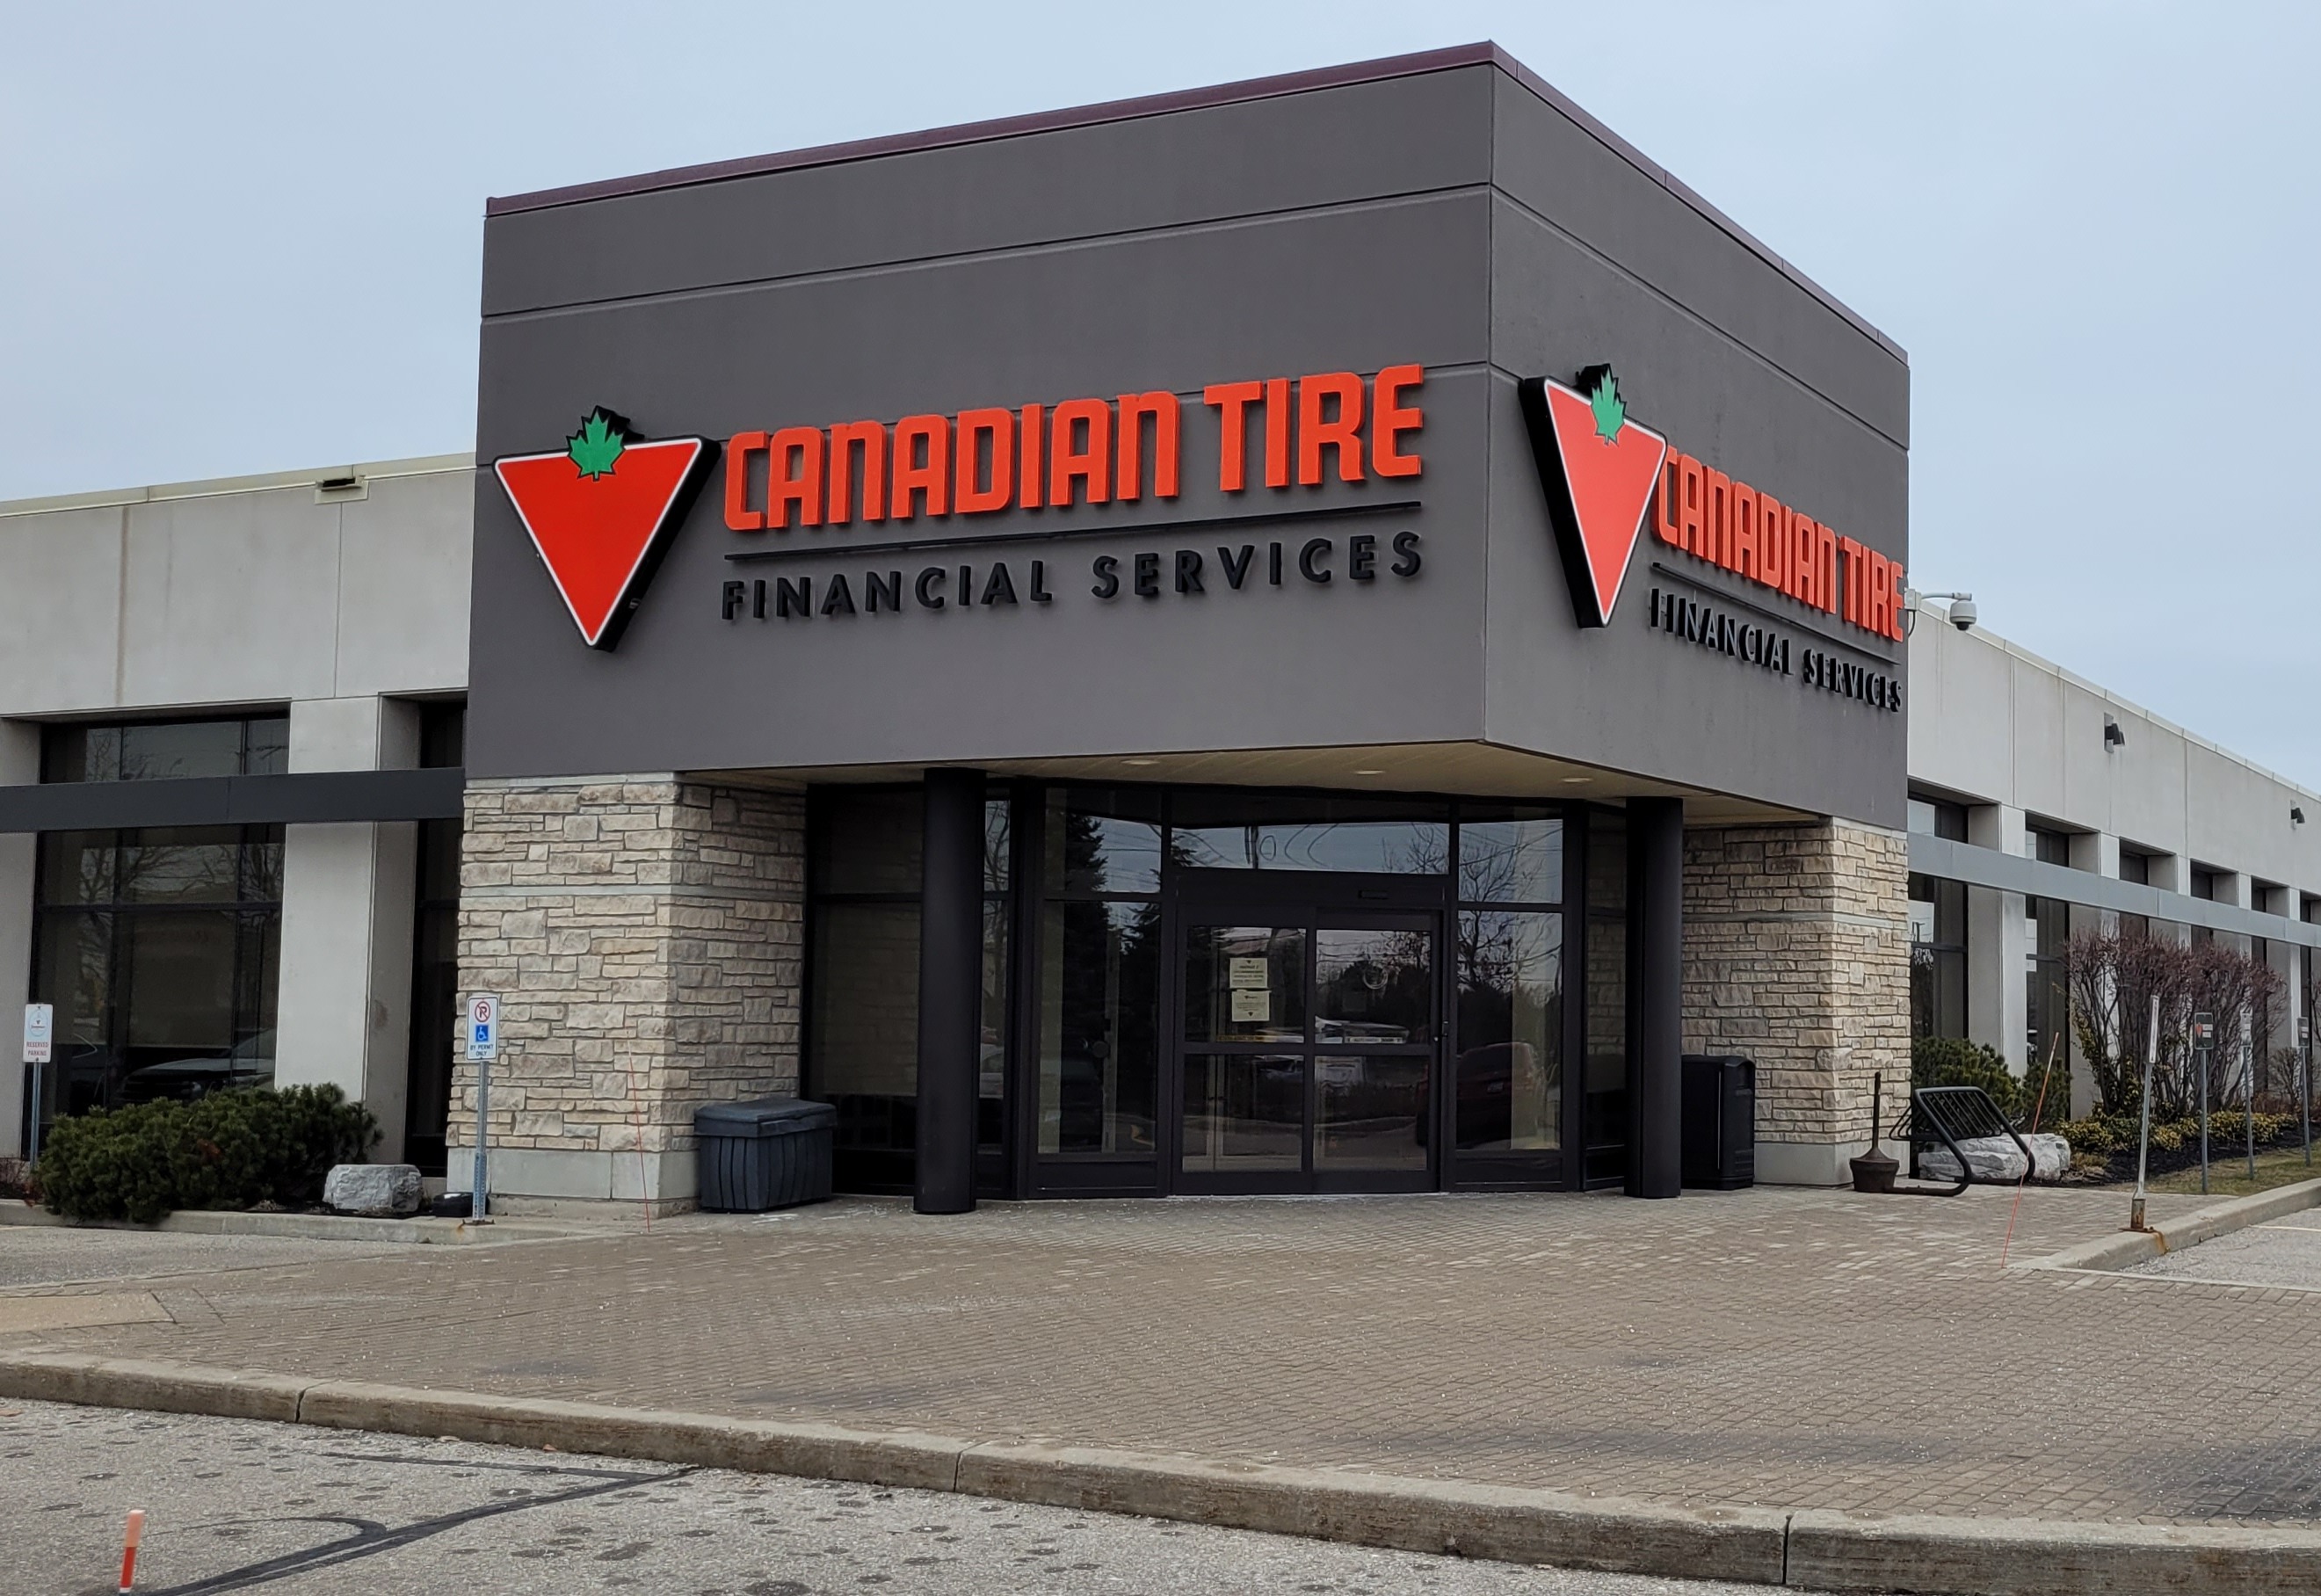 Does Canadian Tire Price Match? - Loans Canada